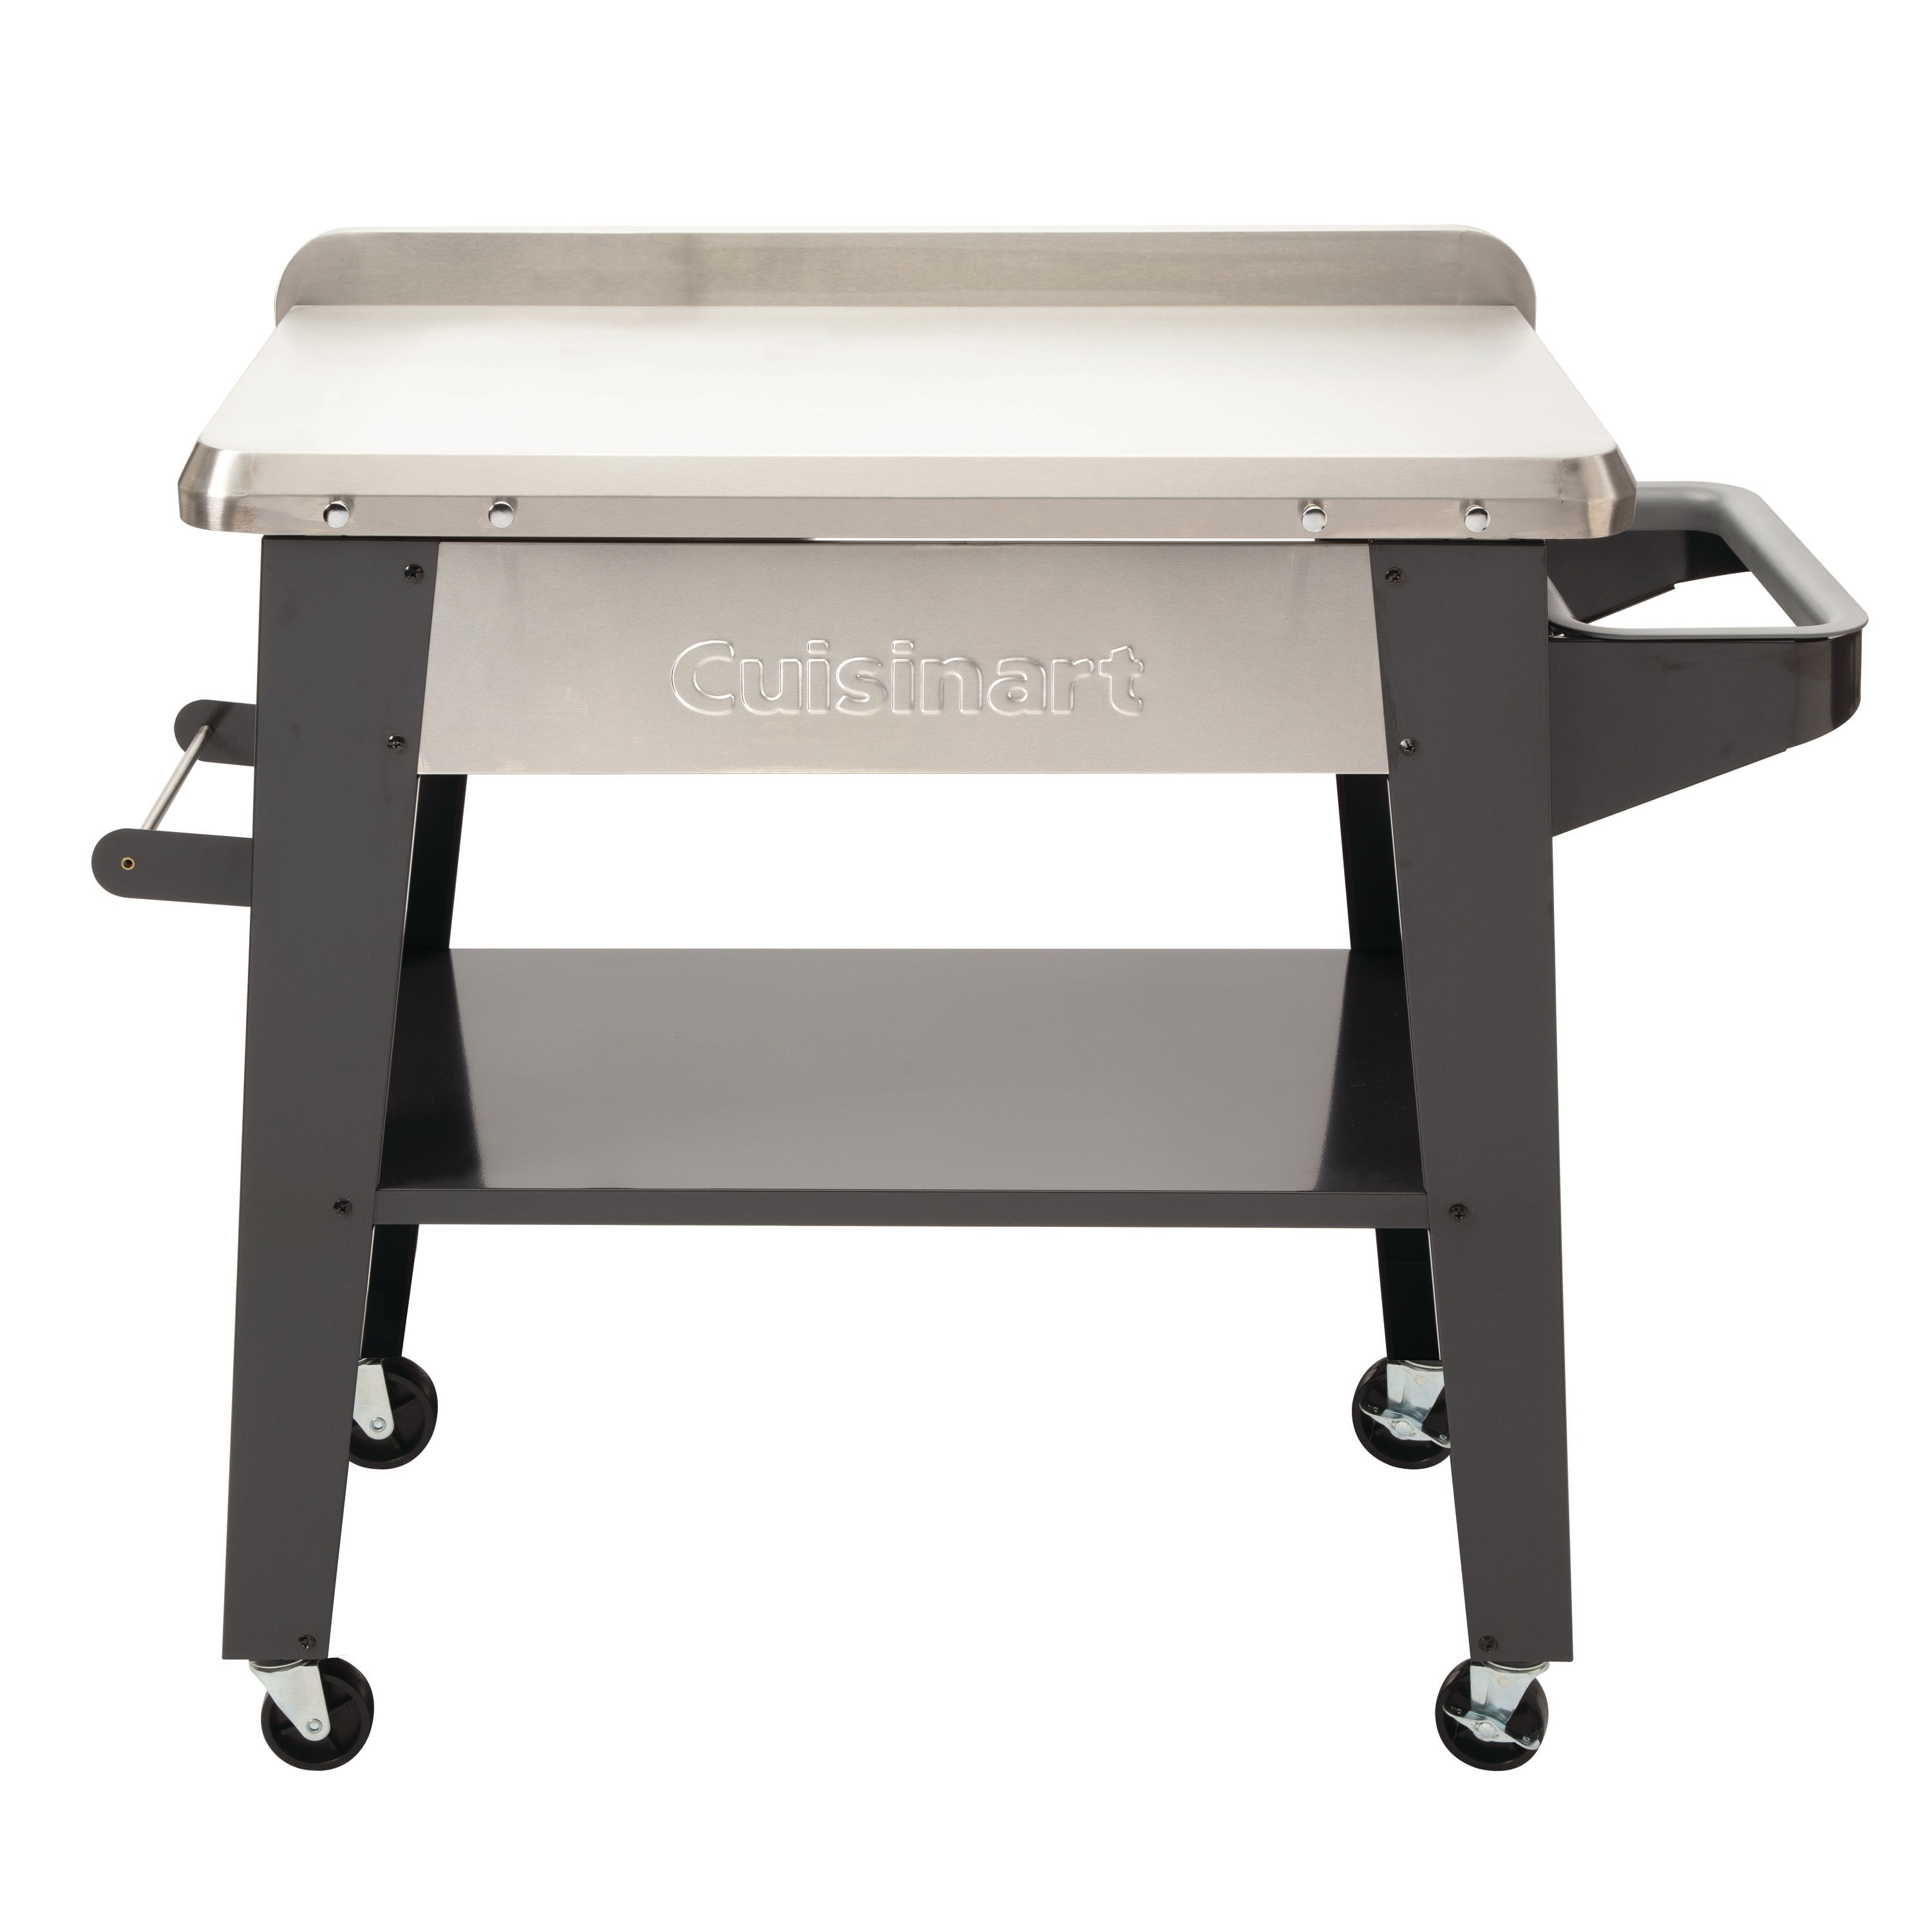 Cuisinart Fold N Go Prep And Grill Table : Target